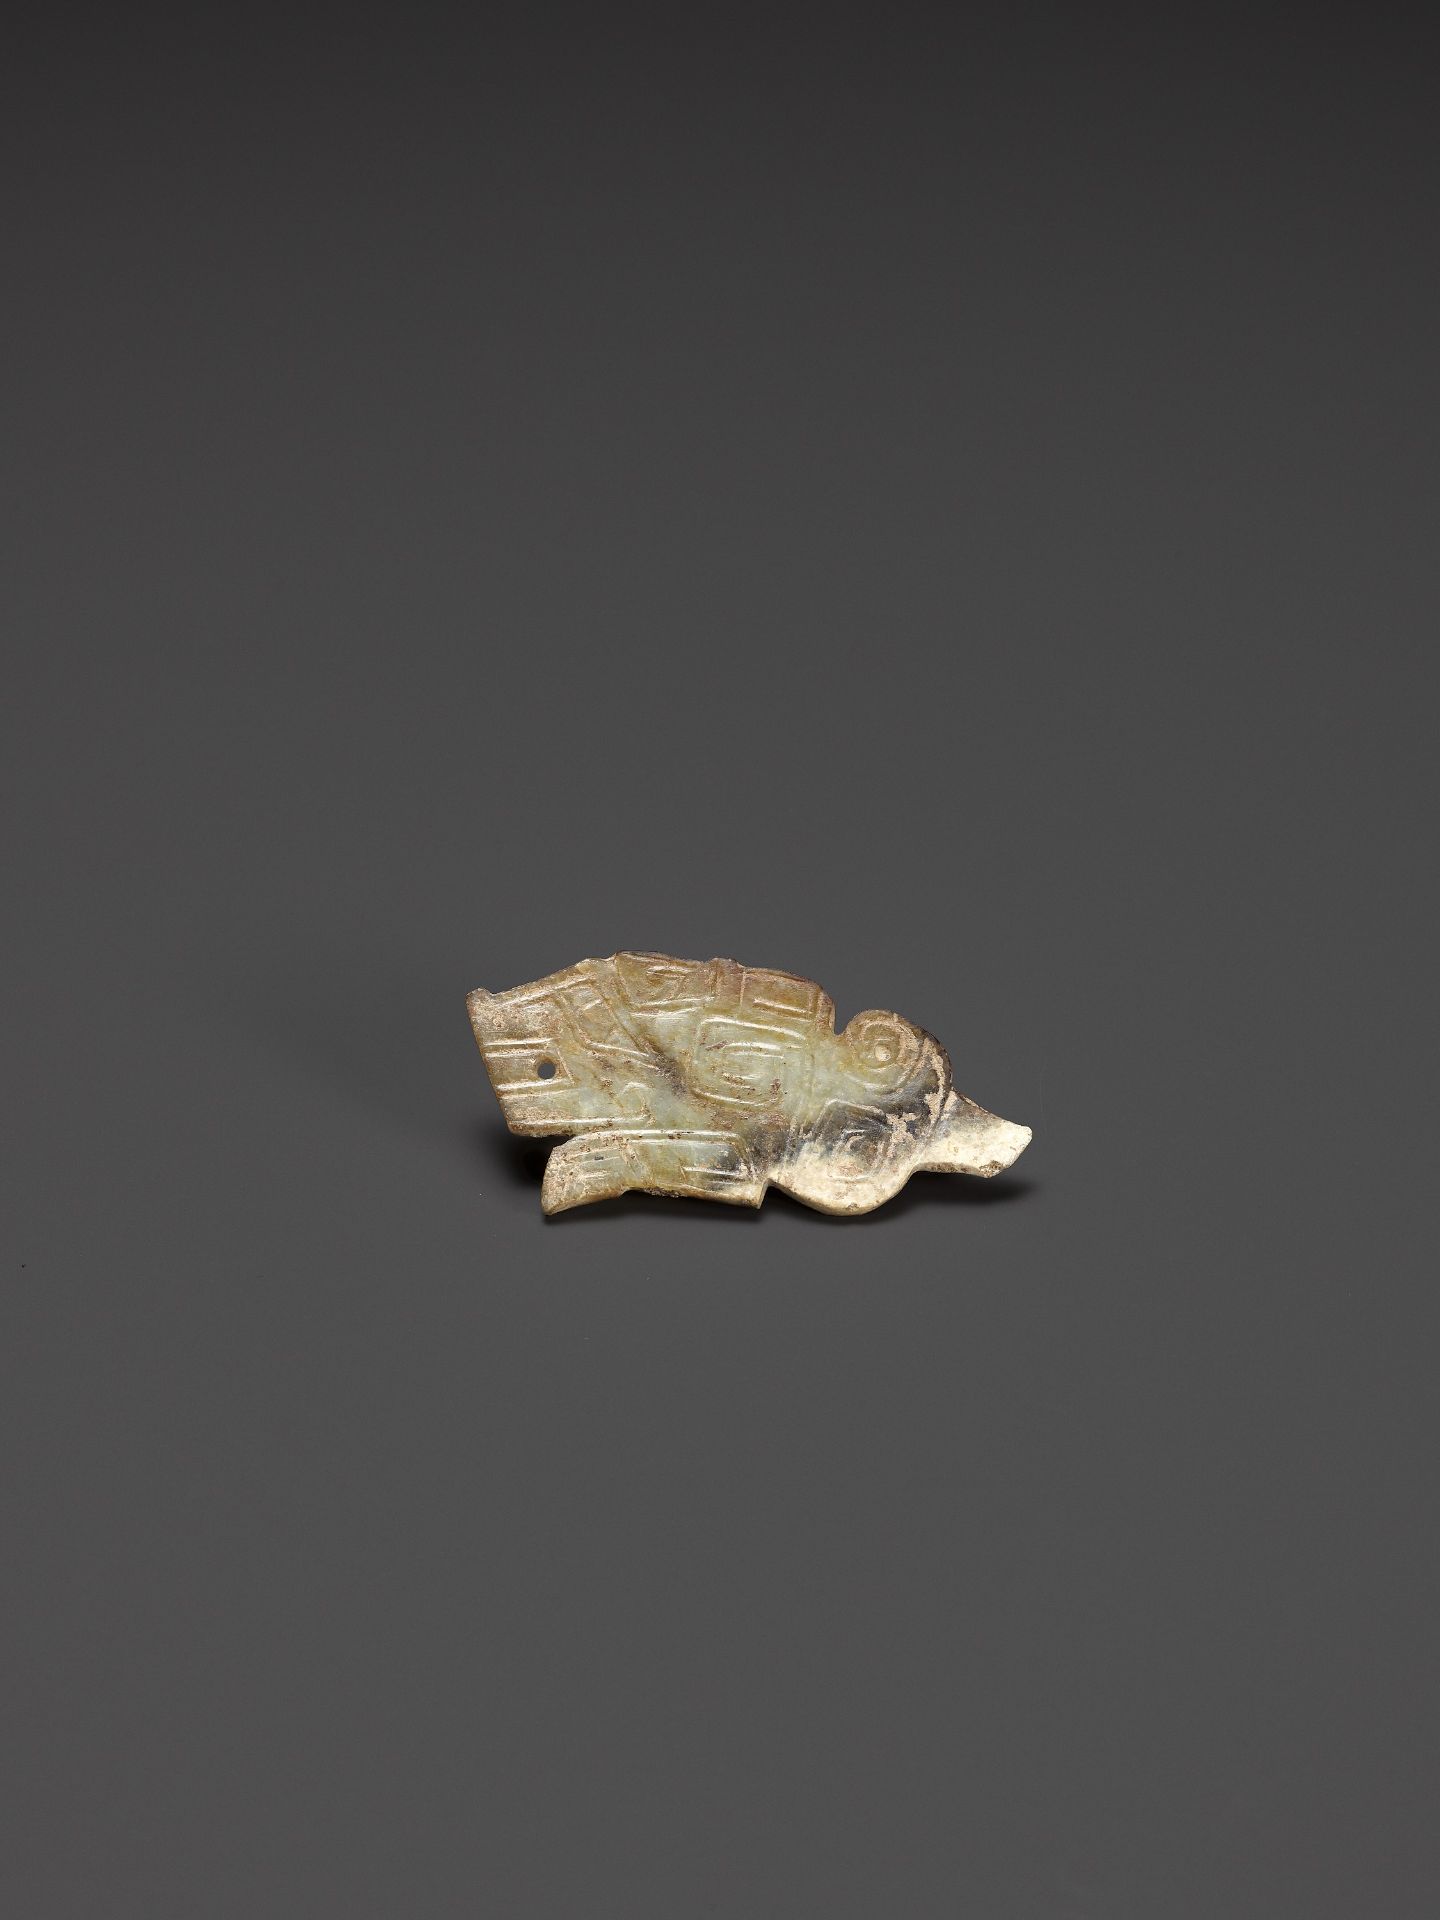 A TIGER-FORM JADE PENDANT, LATE SHANG DYNASTY - Image 2 of 10